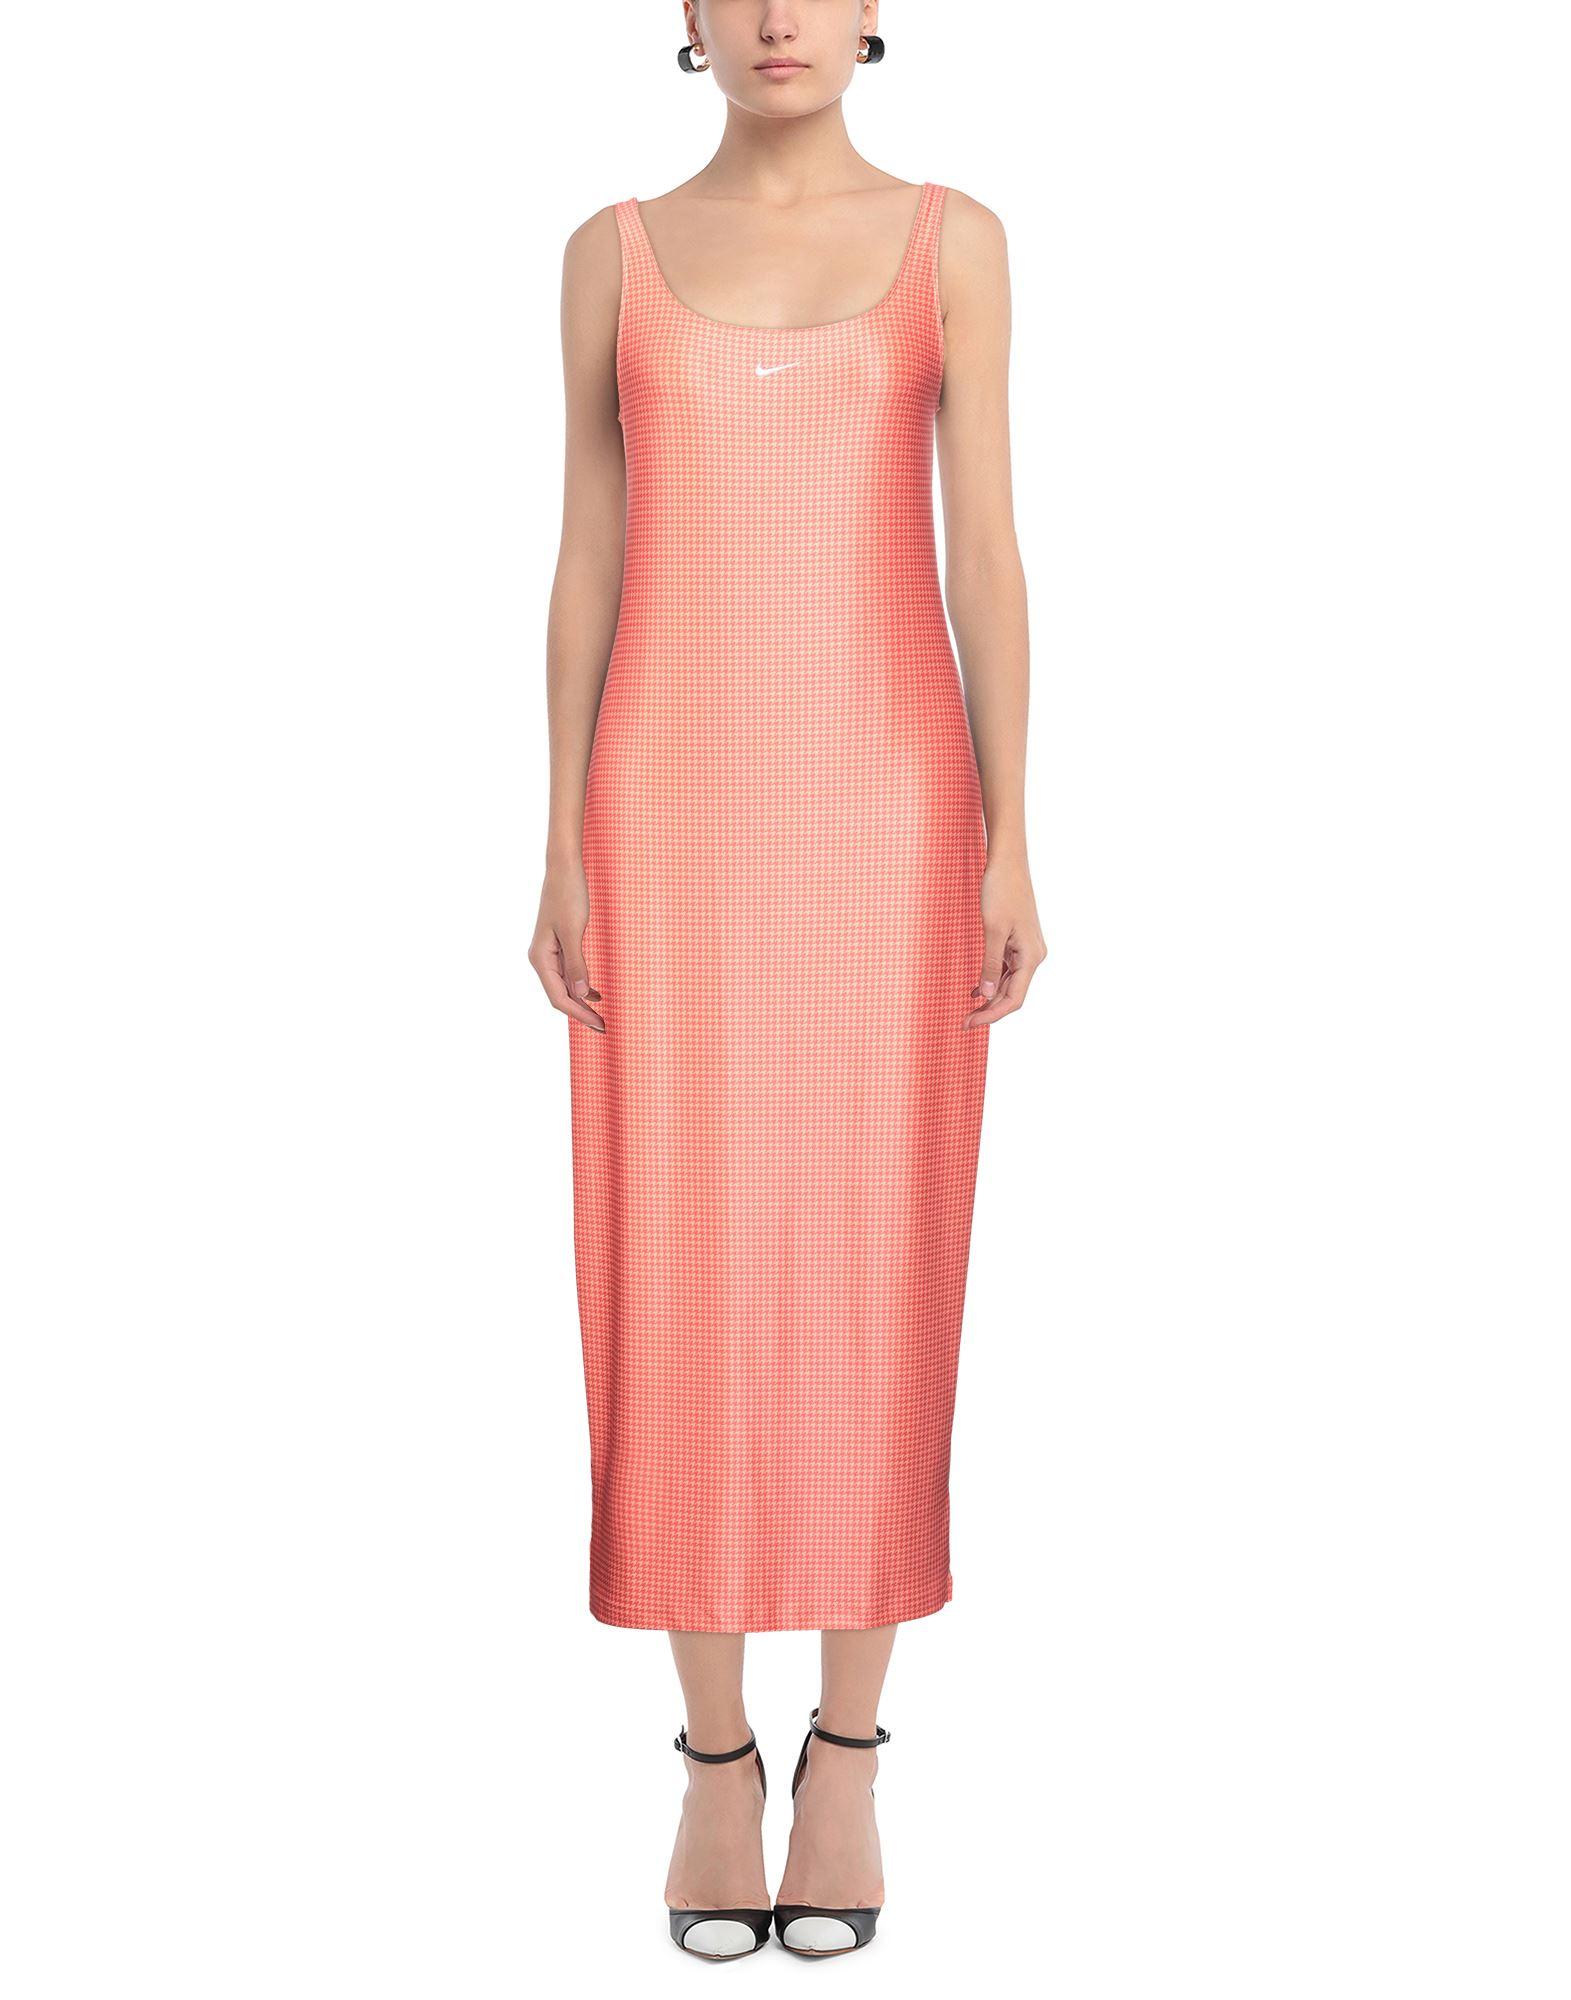 Nike Synthetic Midi Dress in Coral (Pink) | Lyst